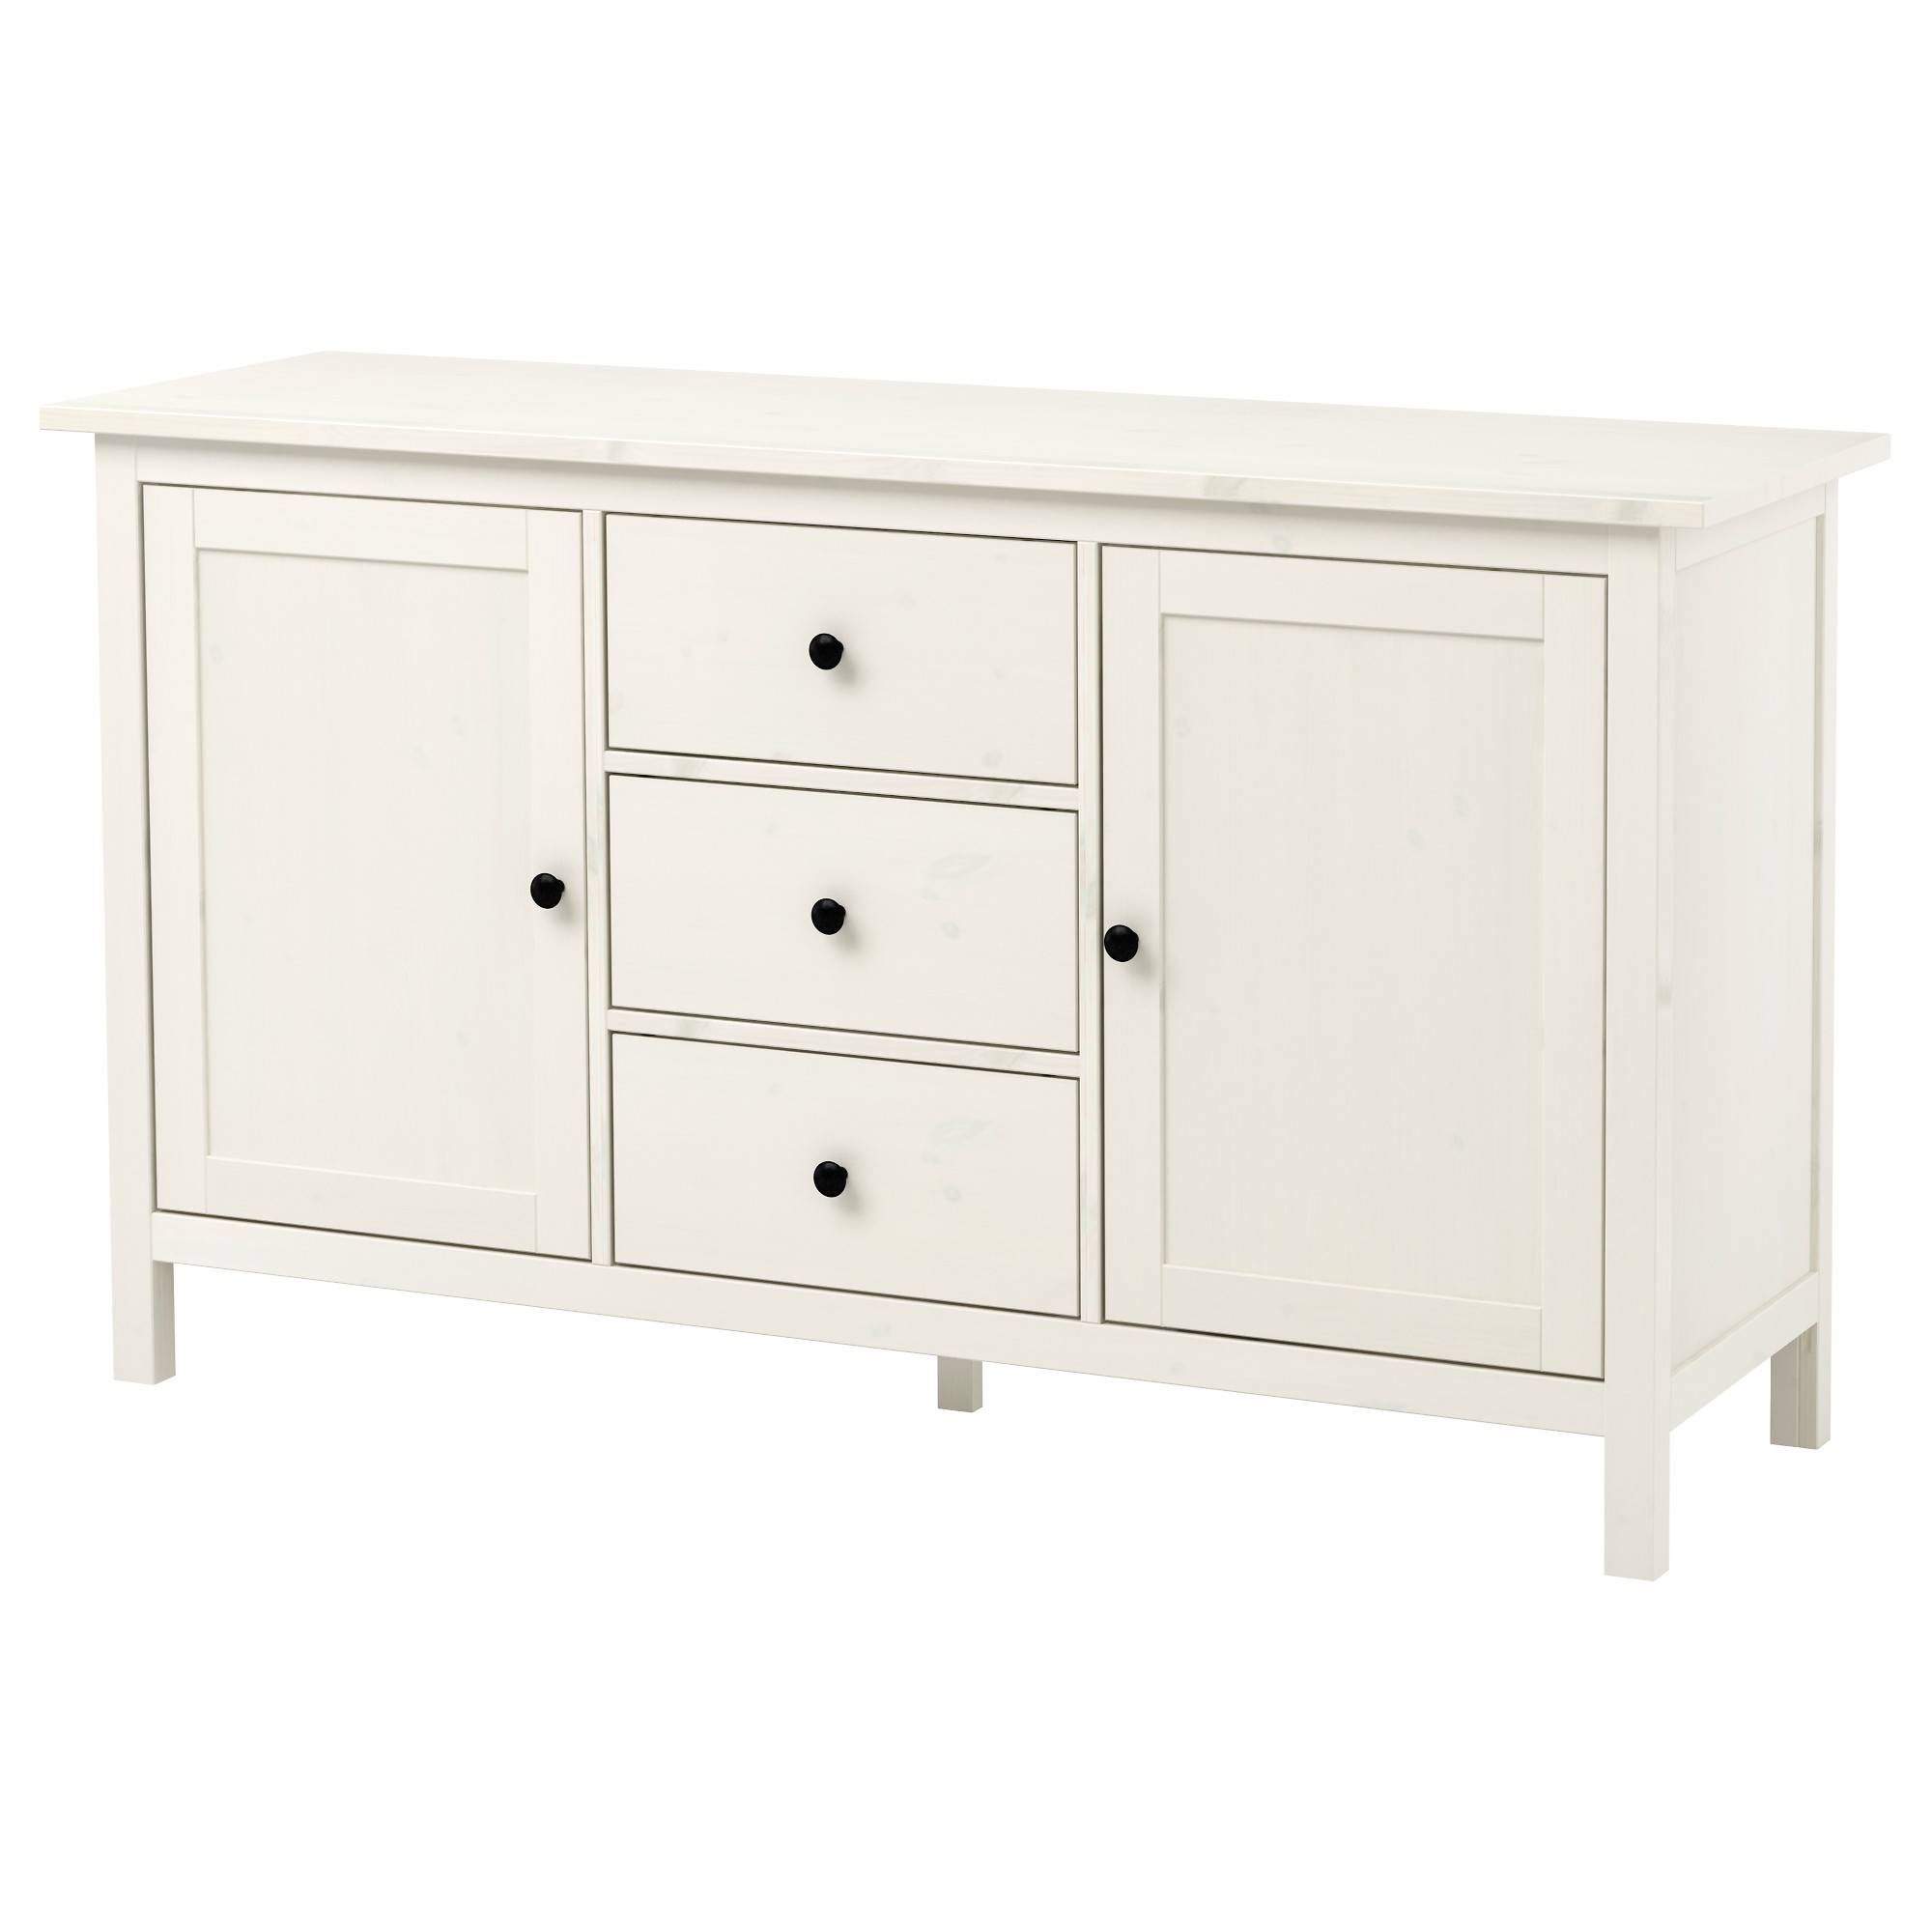 Buffet Tables & Sideboards – Ikea Intended For Small Sideboards With Drawers (View 4 of 15)